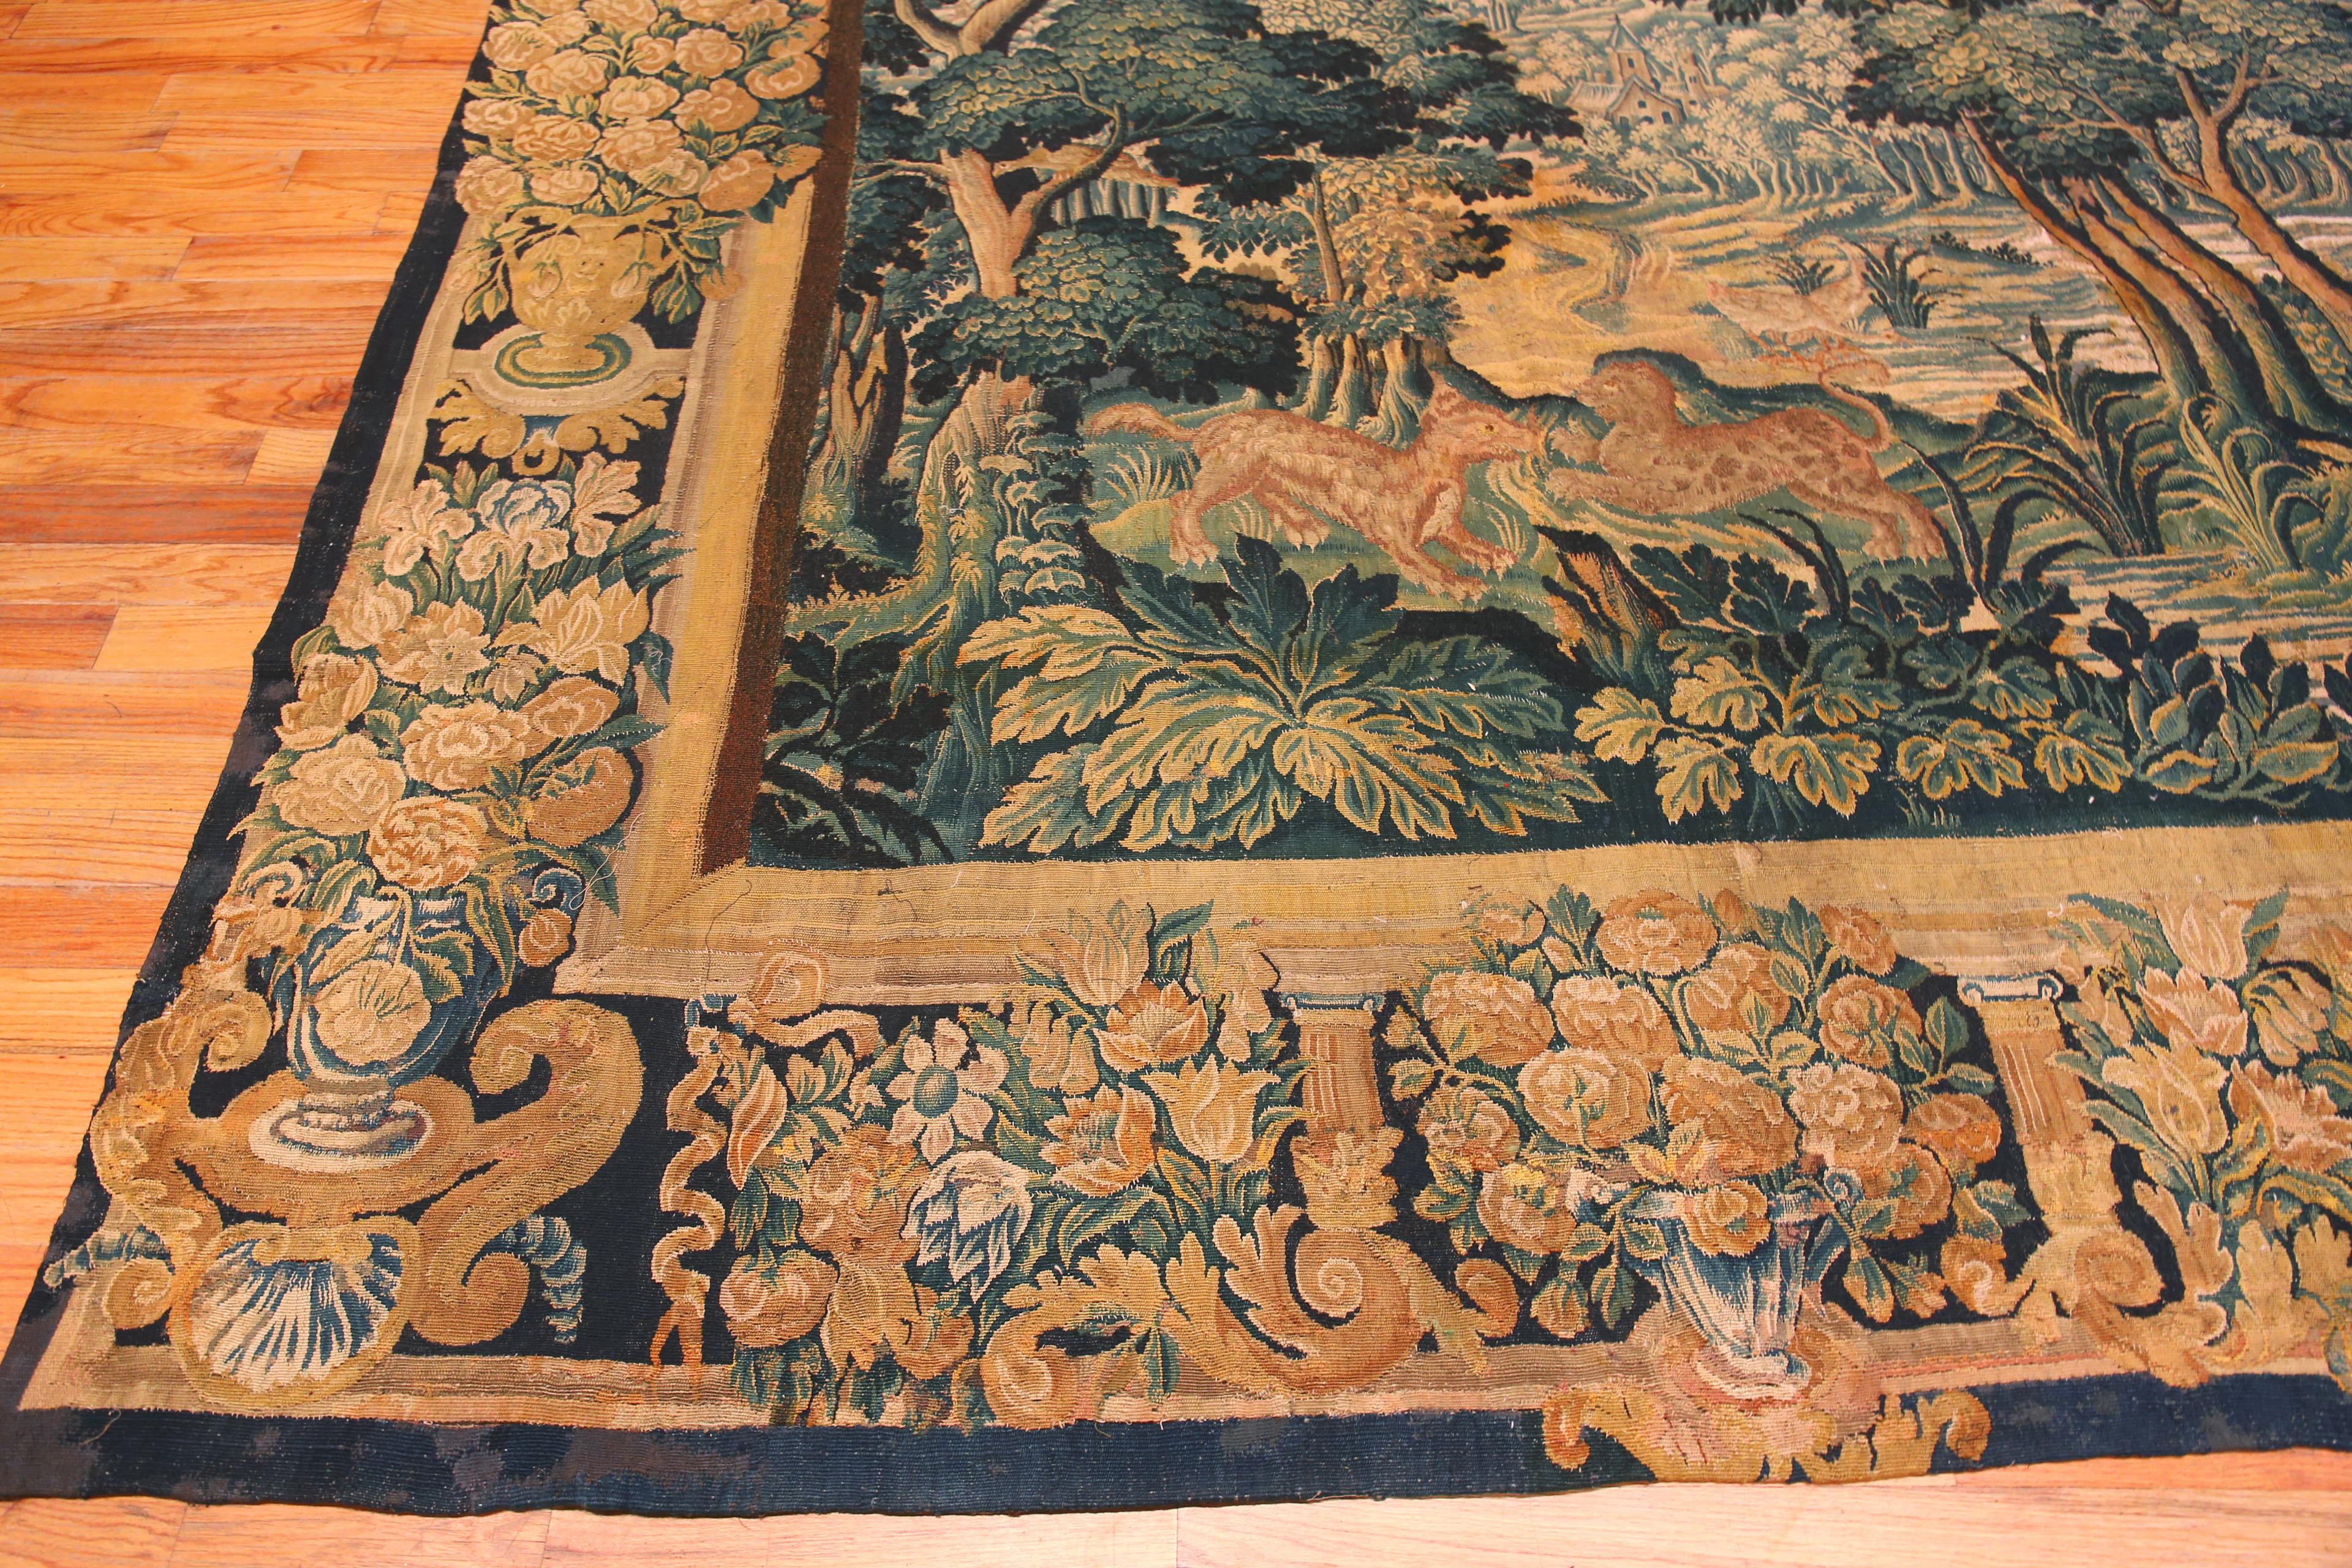 Hand-Knotted Amazing 17th Century Antique French Silk And Wool Verdure Tapestry 10' x 12'10